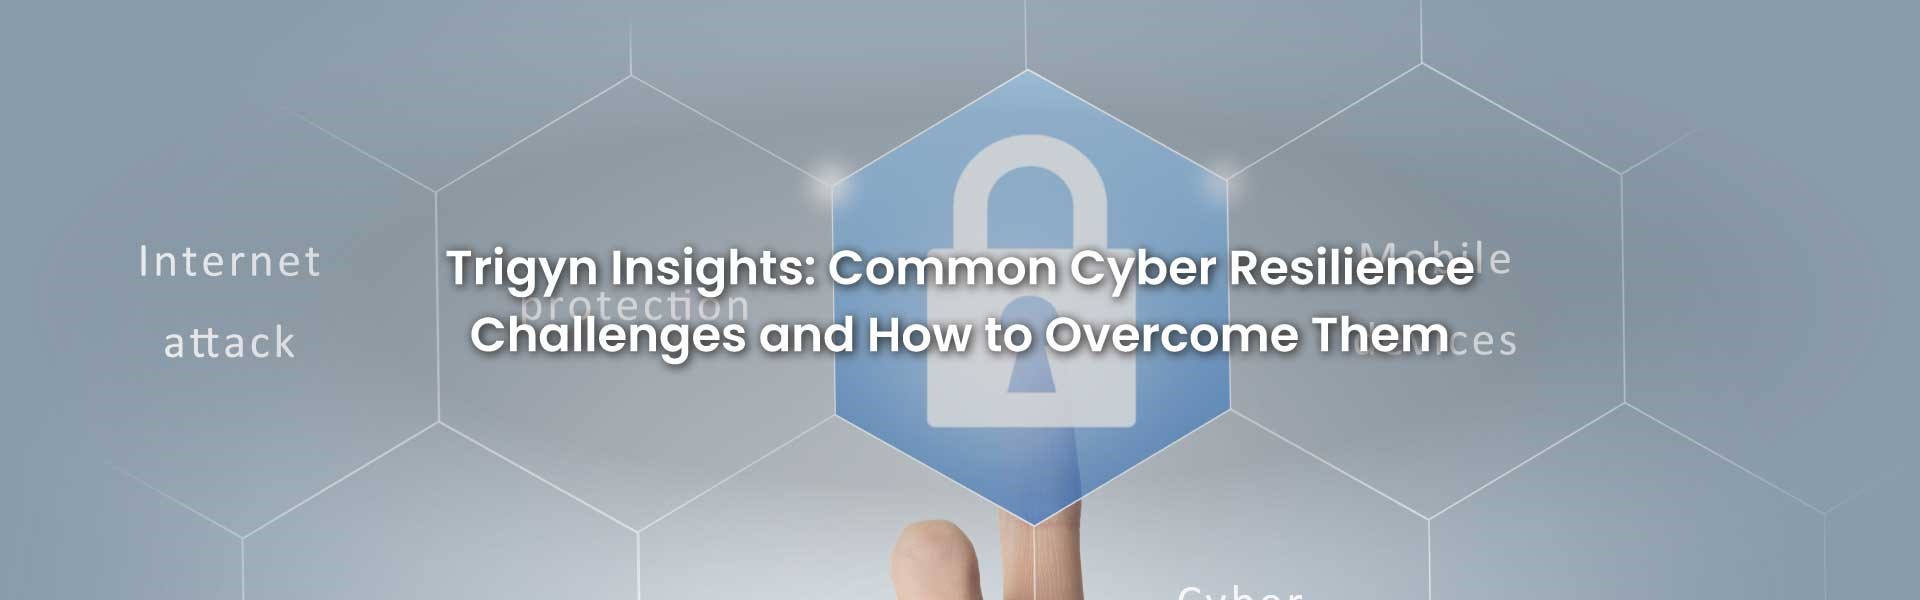 Common Cyber Resilience Challenges 